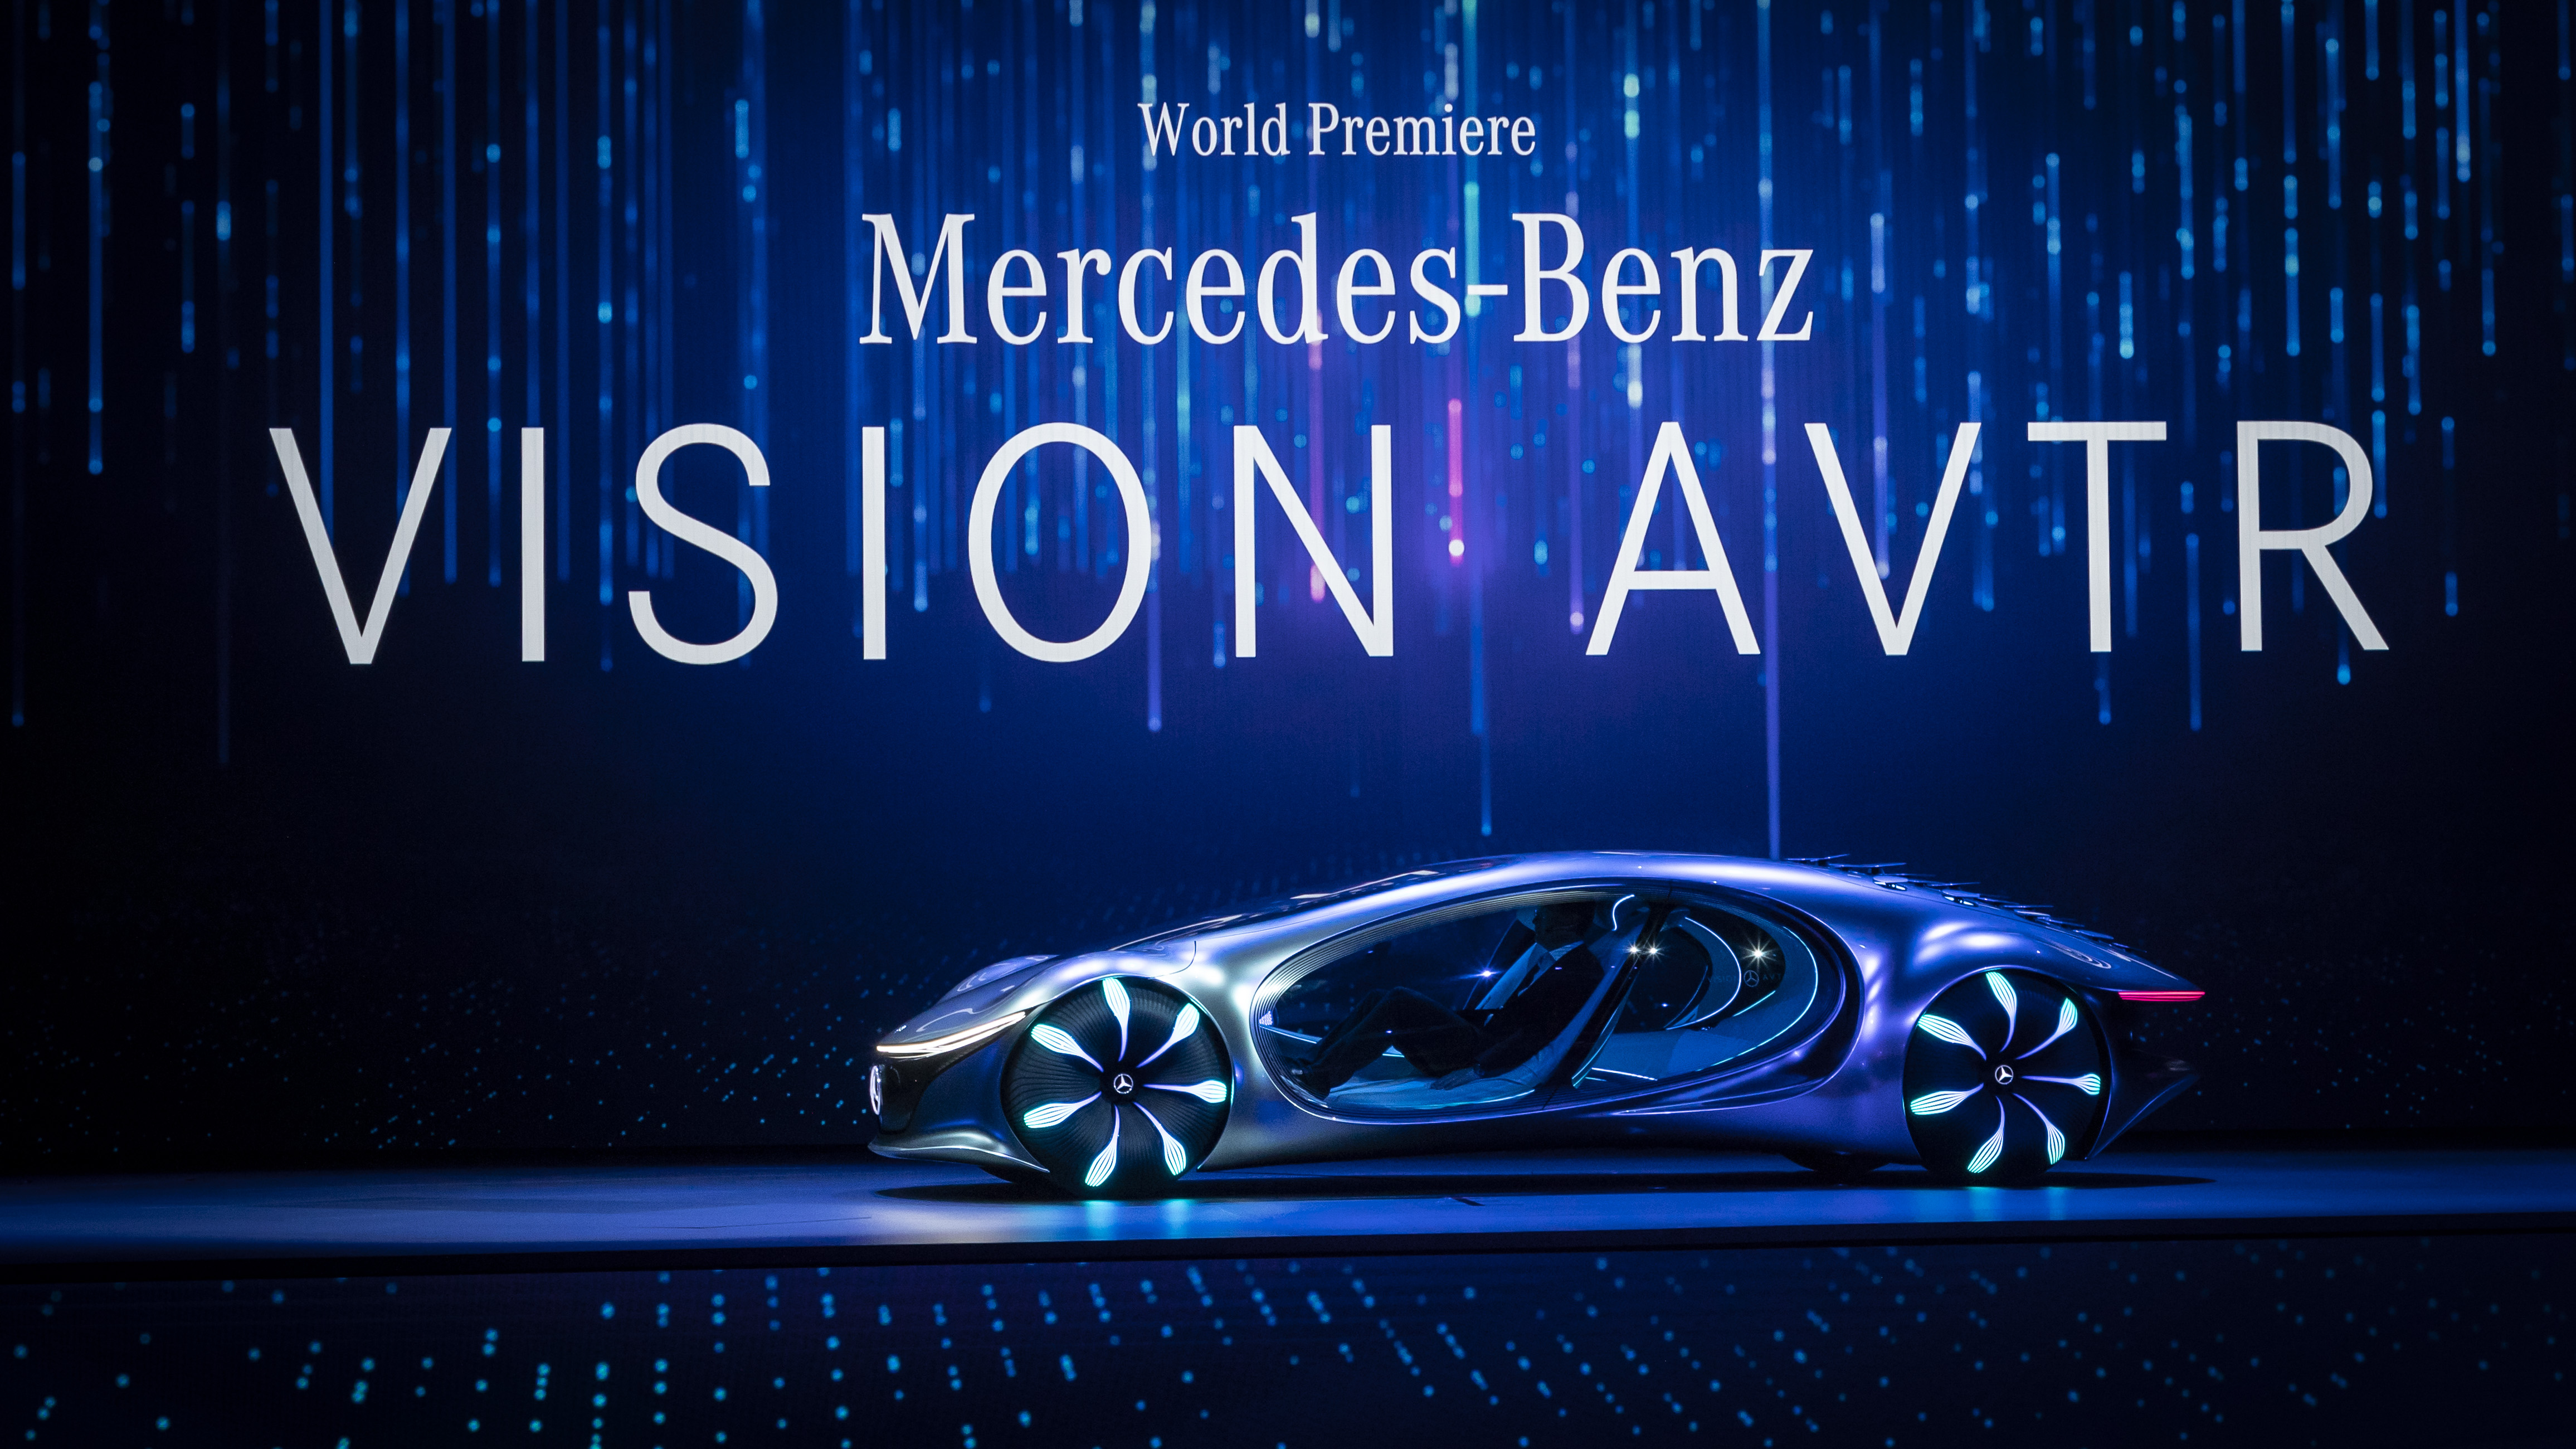 Mercedes-Benz unveiled its vision for the future of mobility: the VISION AVTR